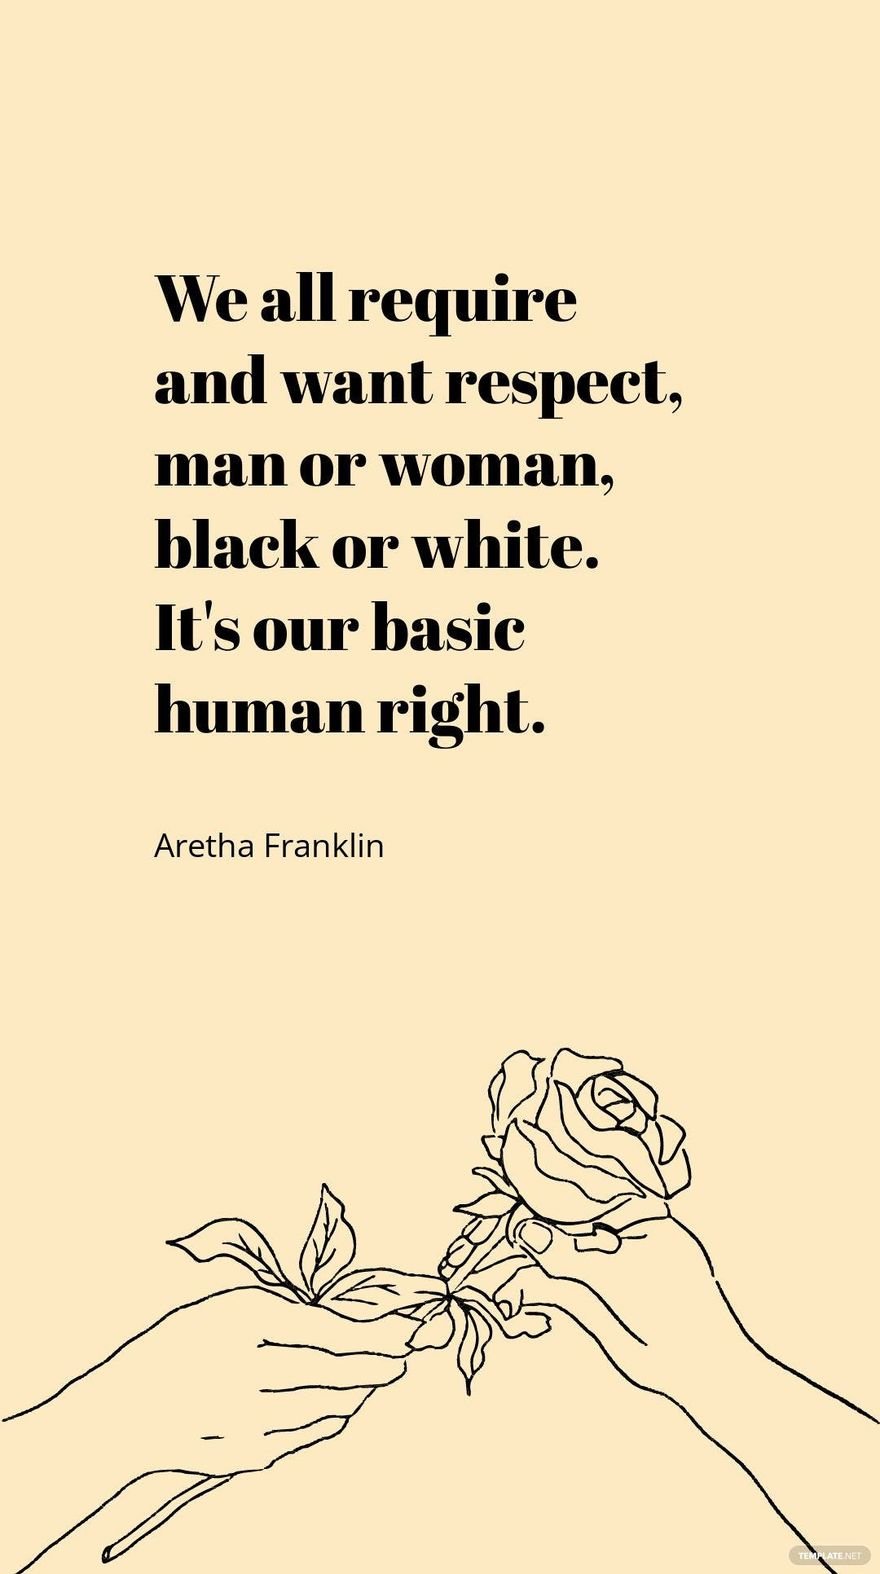 Aretha Franklin - We all require and want respect, man or woman, Black or white. It's our basic human right.